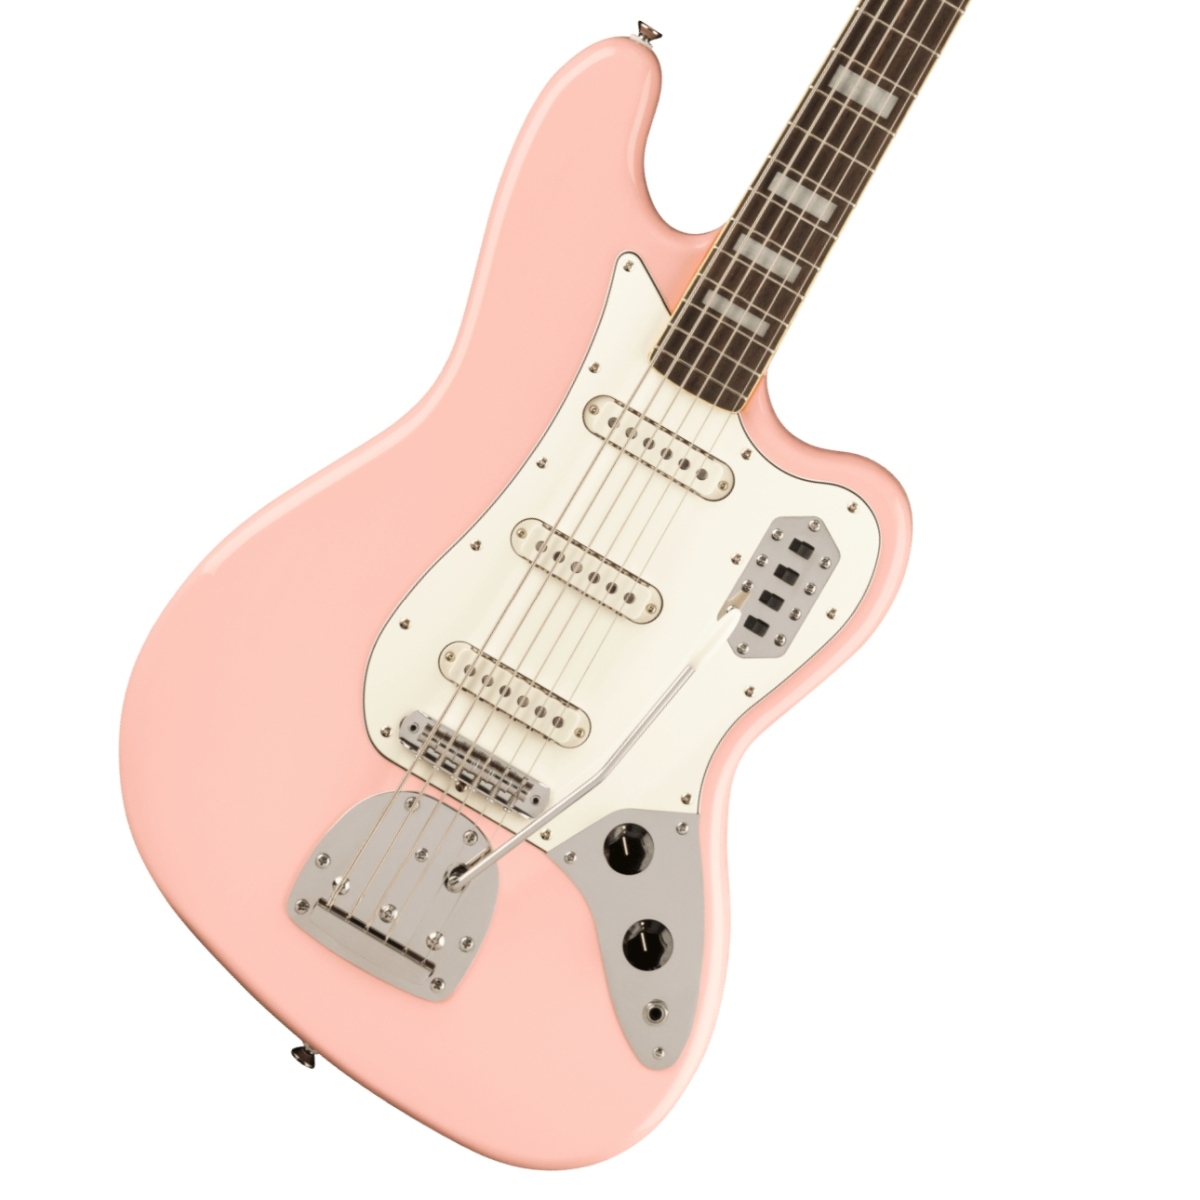 Squier by Fender / FSR Classic Vibe Bass VI Laurel Fingerboard Parchment  Pickguard Matching Headstock Shell Pink フェンダー